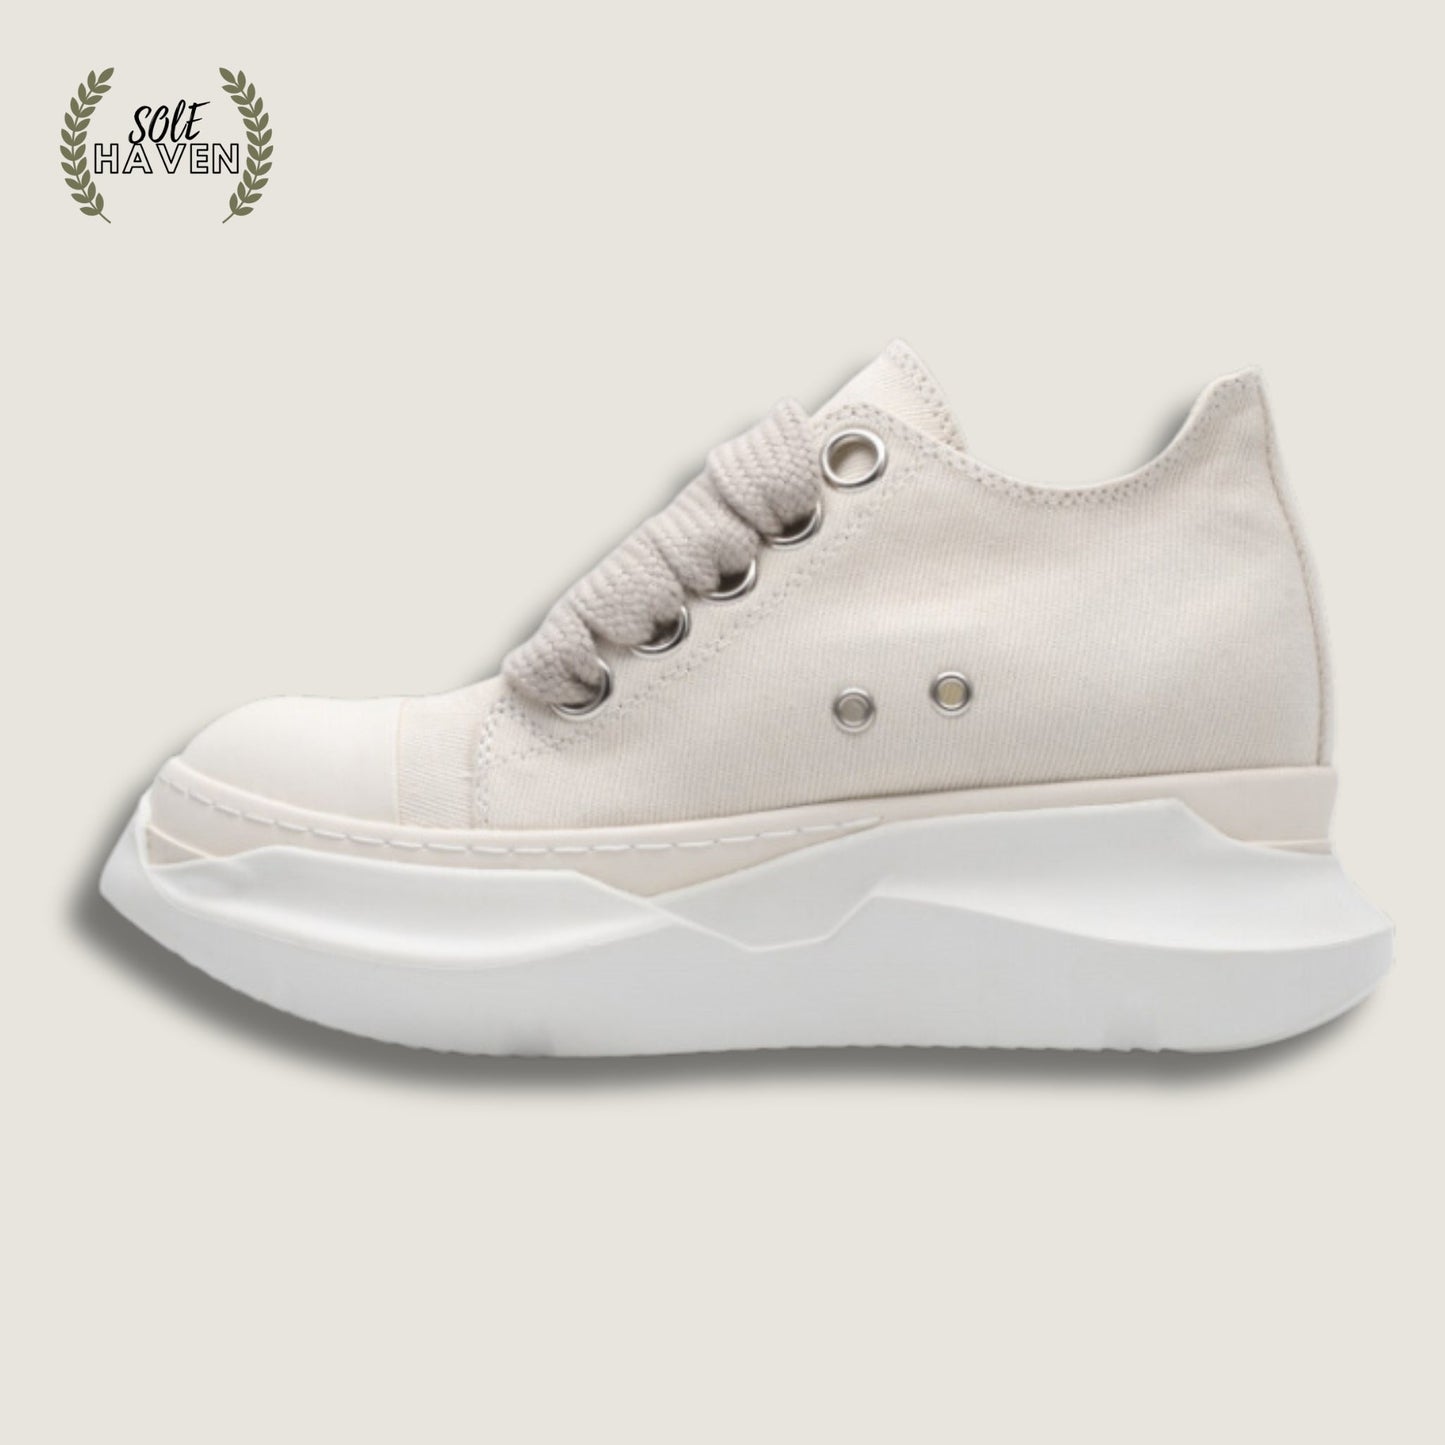 Rick Owens DRKSHDW Abstract Low 'Milk' - Sole HavenShoesRick Owens